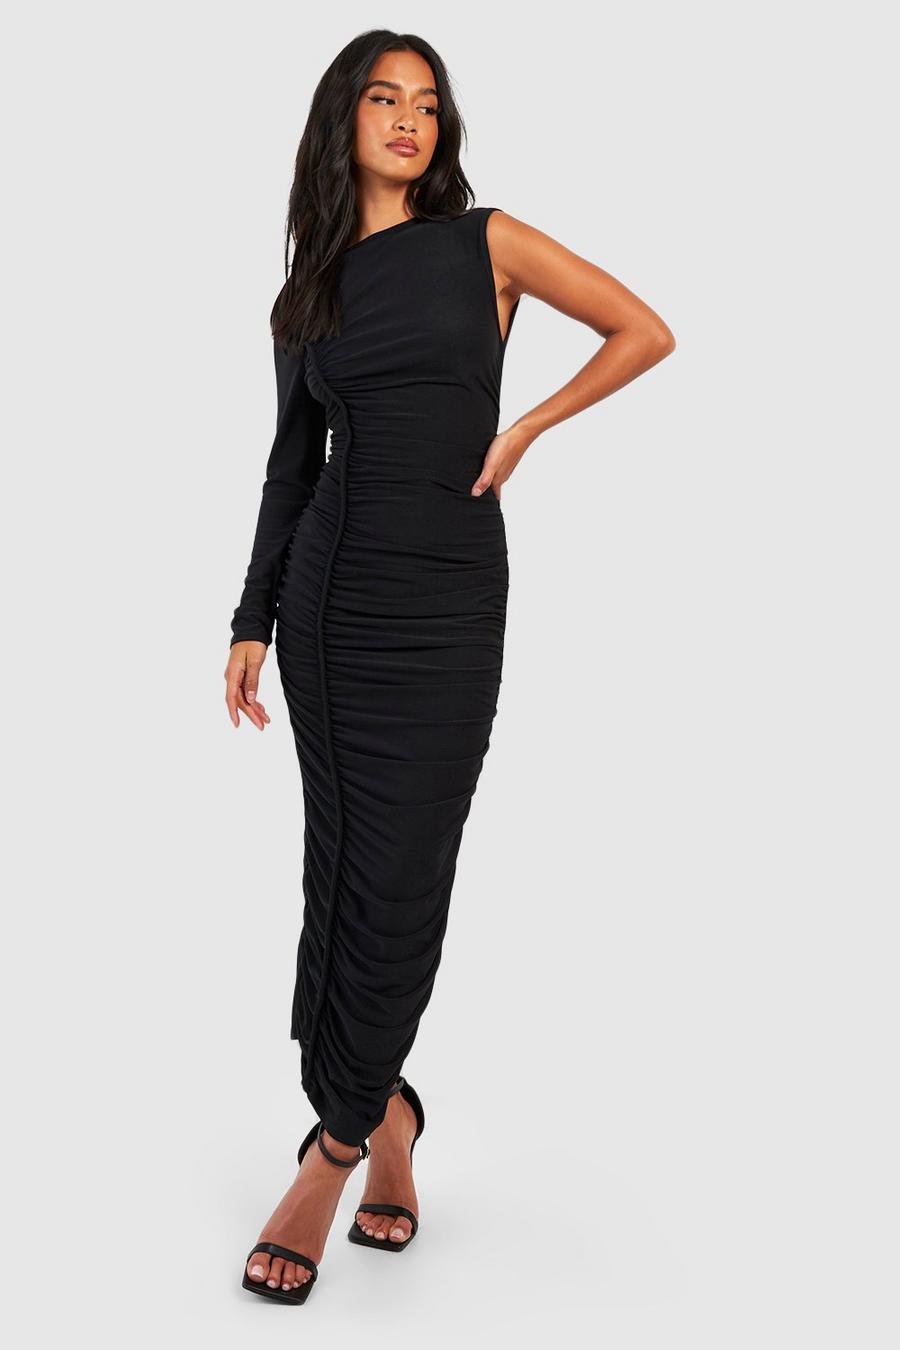 Black Petite One Sleeve Side Ruched Midaxi Dress